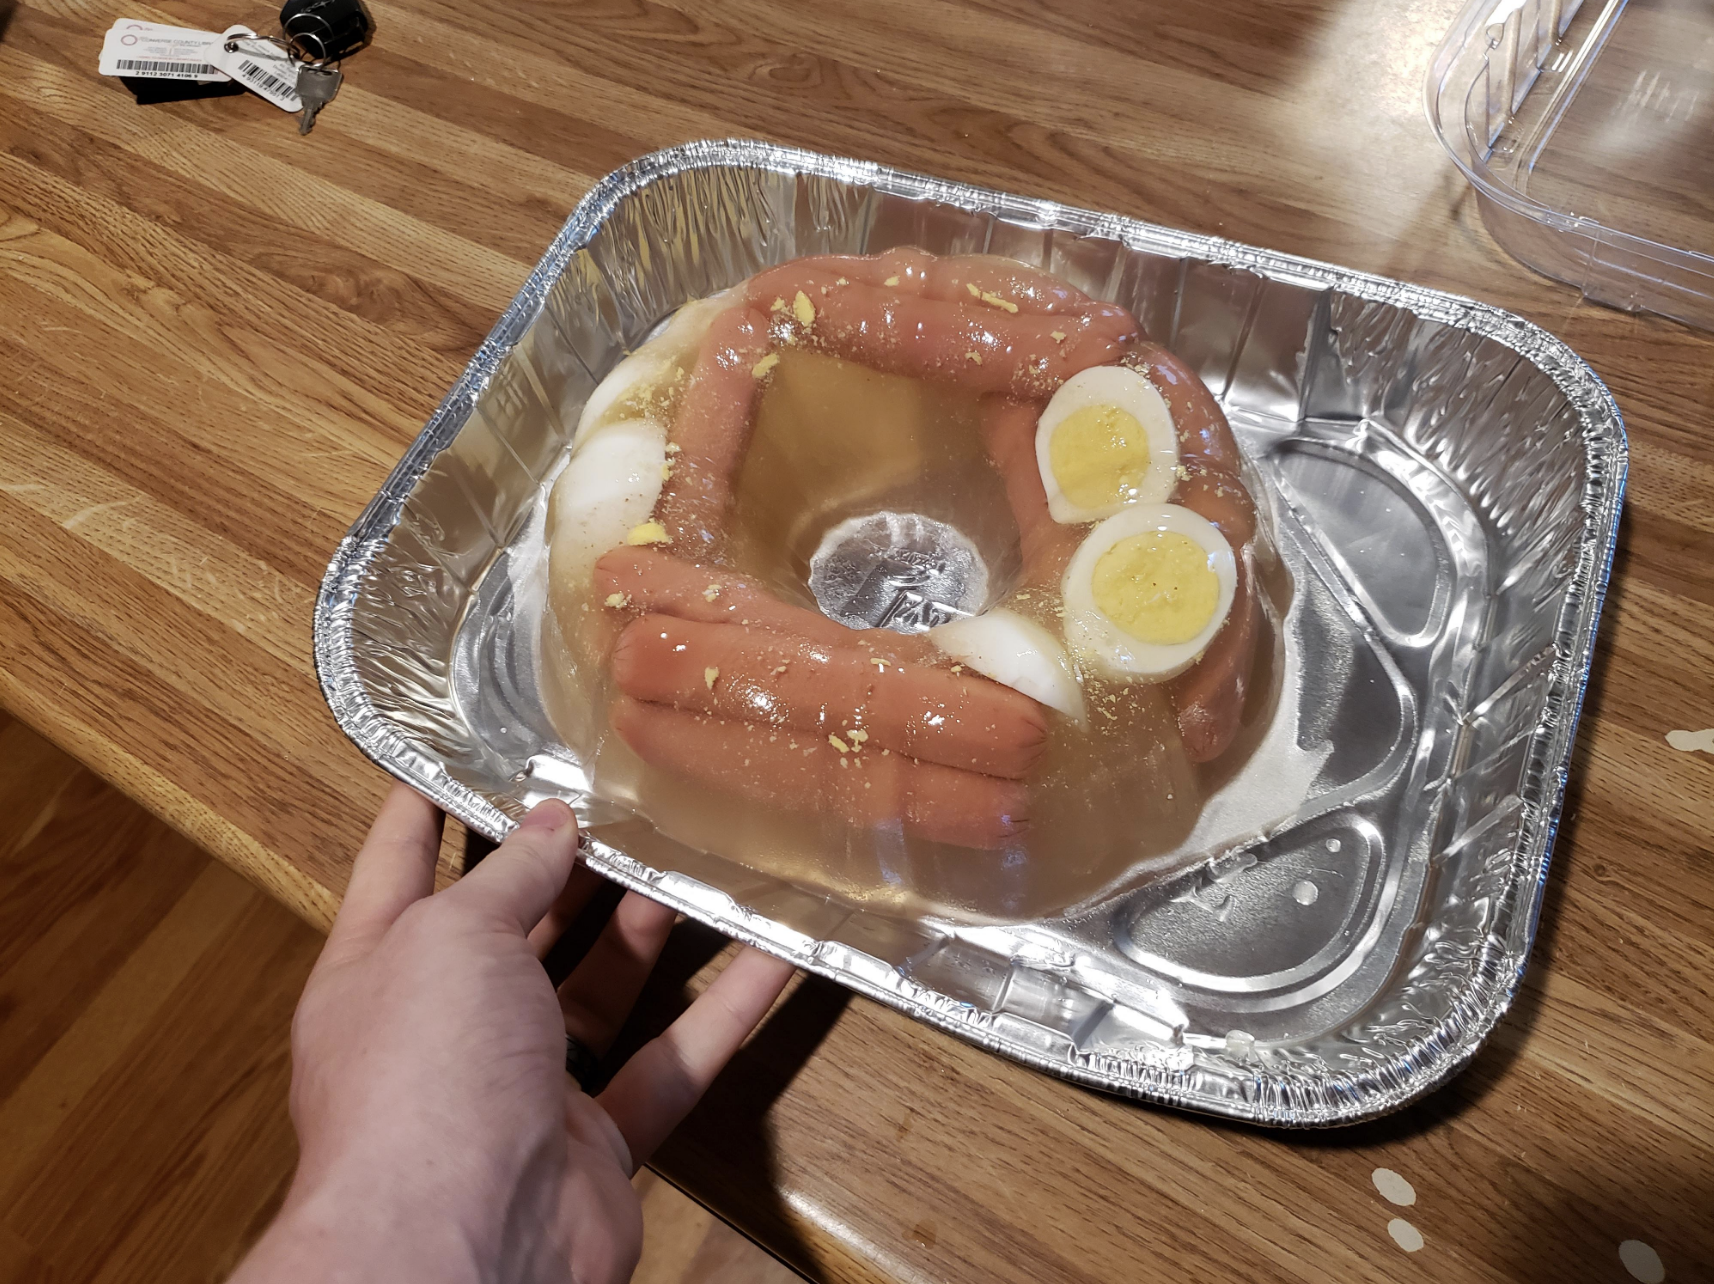 The hot dogs, gelatin, and hard-boiled eggs are all wrapped in plastic together, making them looking one disgusting mass